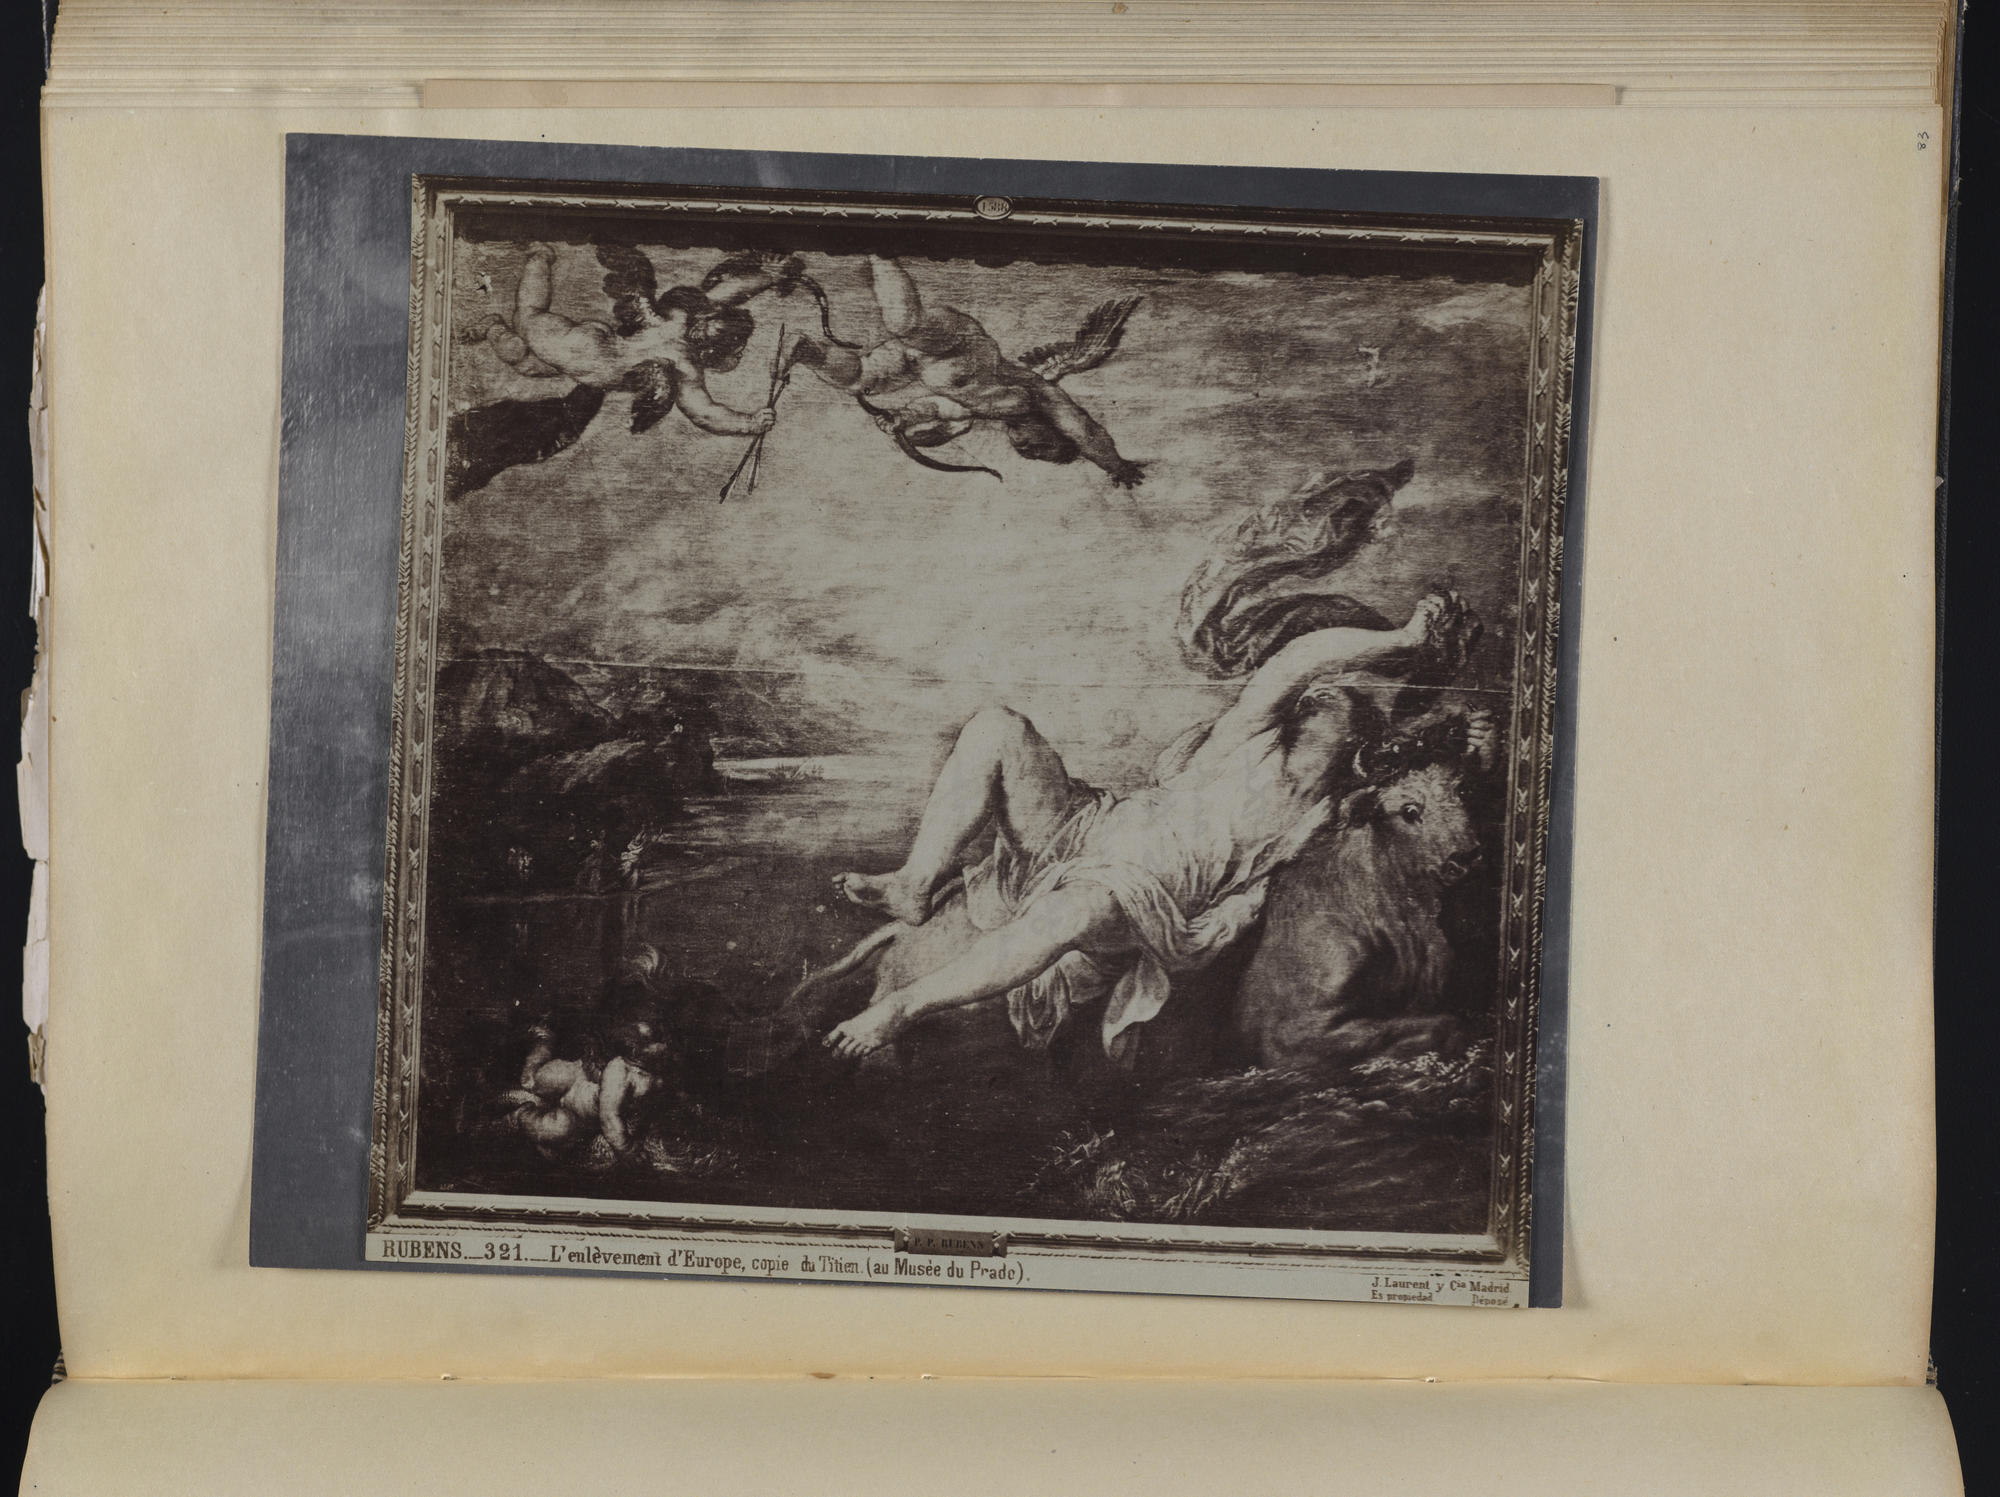 A black and white image of the Rape of Europa.